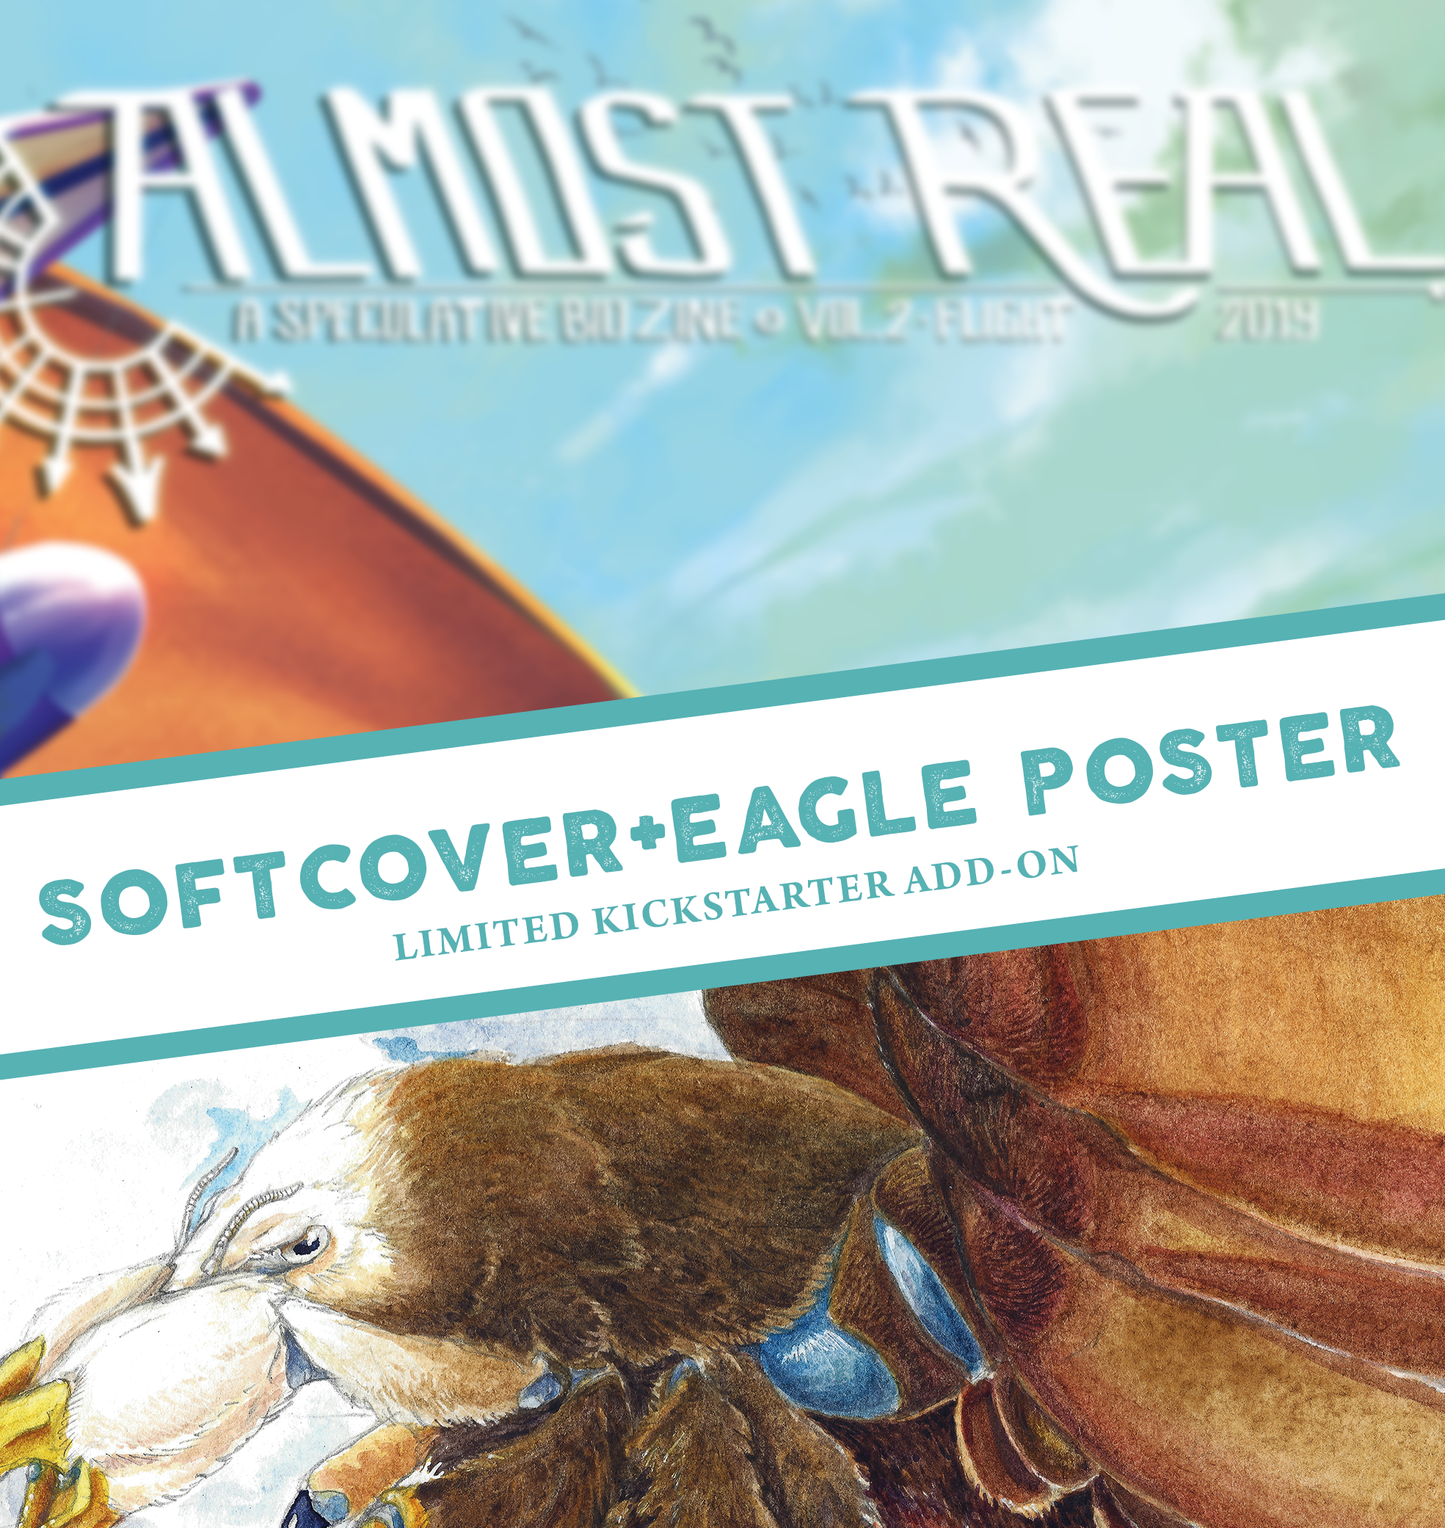 Almost Real: A Speculative Biology Zine (Vol 2 · FLIGHT) Softcover/Poster Bundle